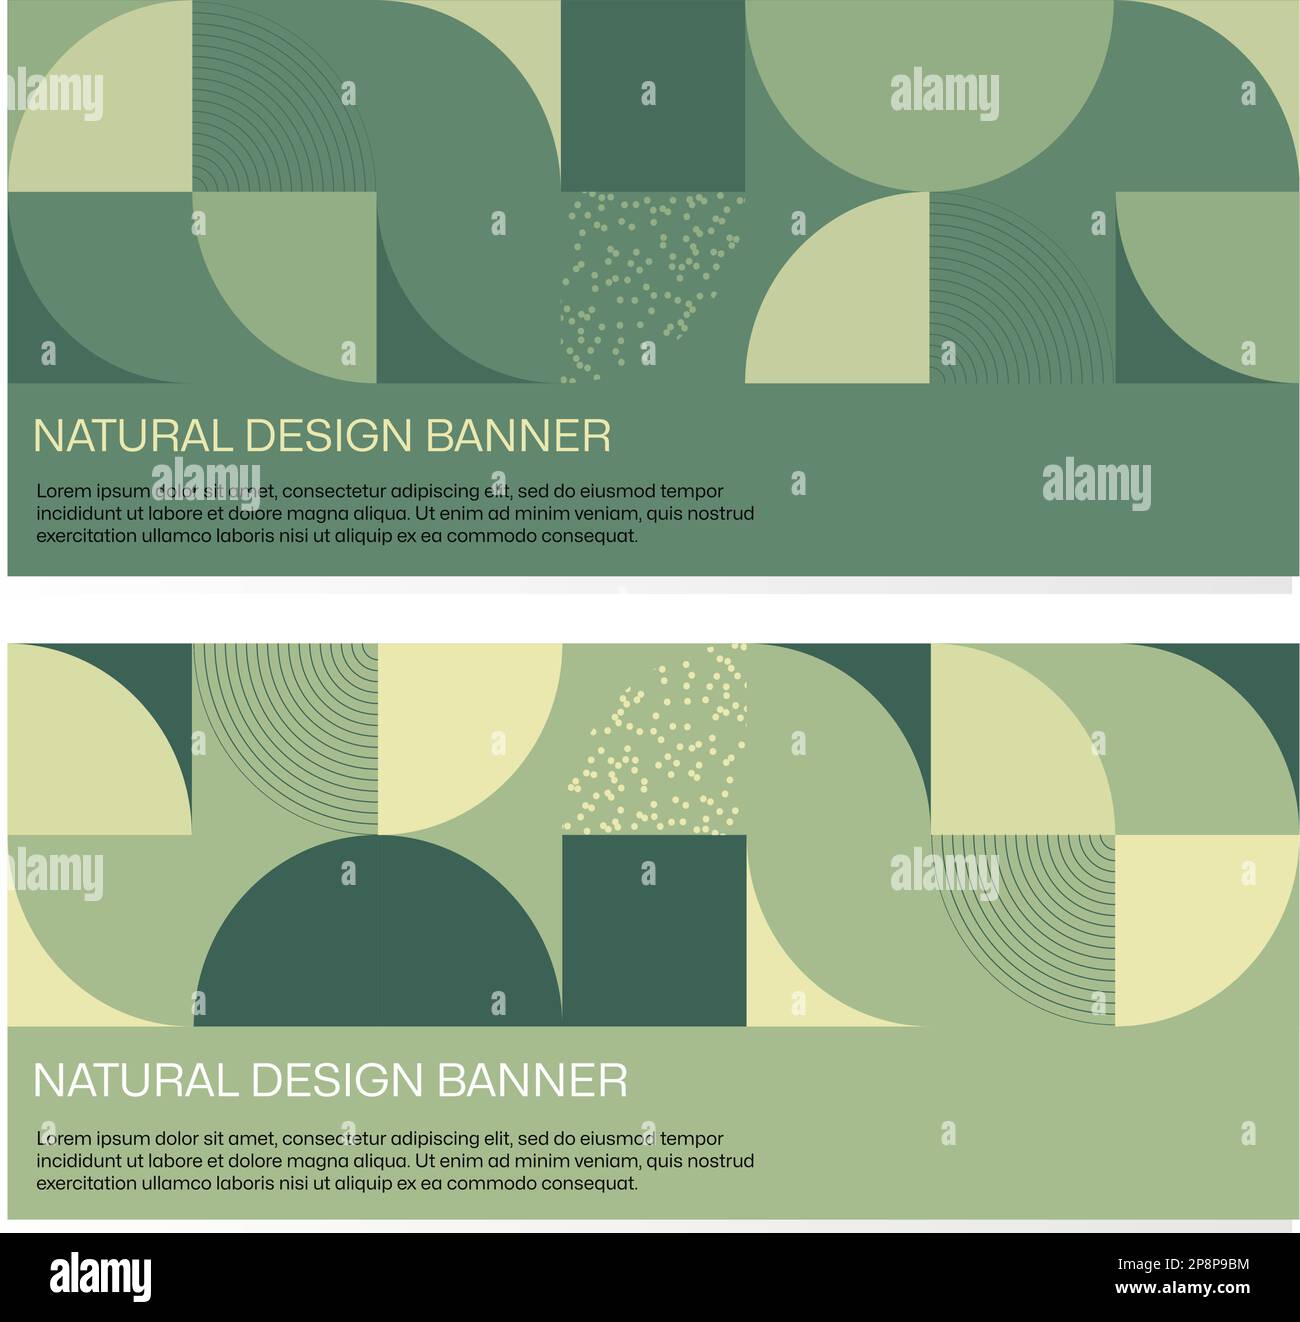 Natural banner design with drawn elements. Use for your banner, card, invitation, background or other design Stock Vector